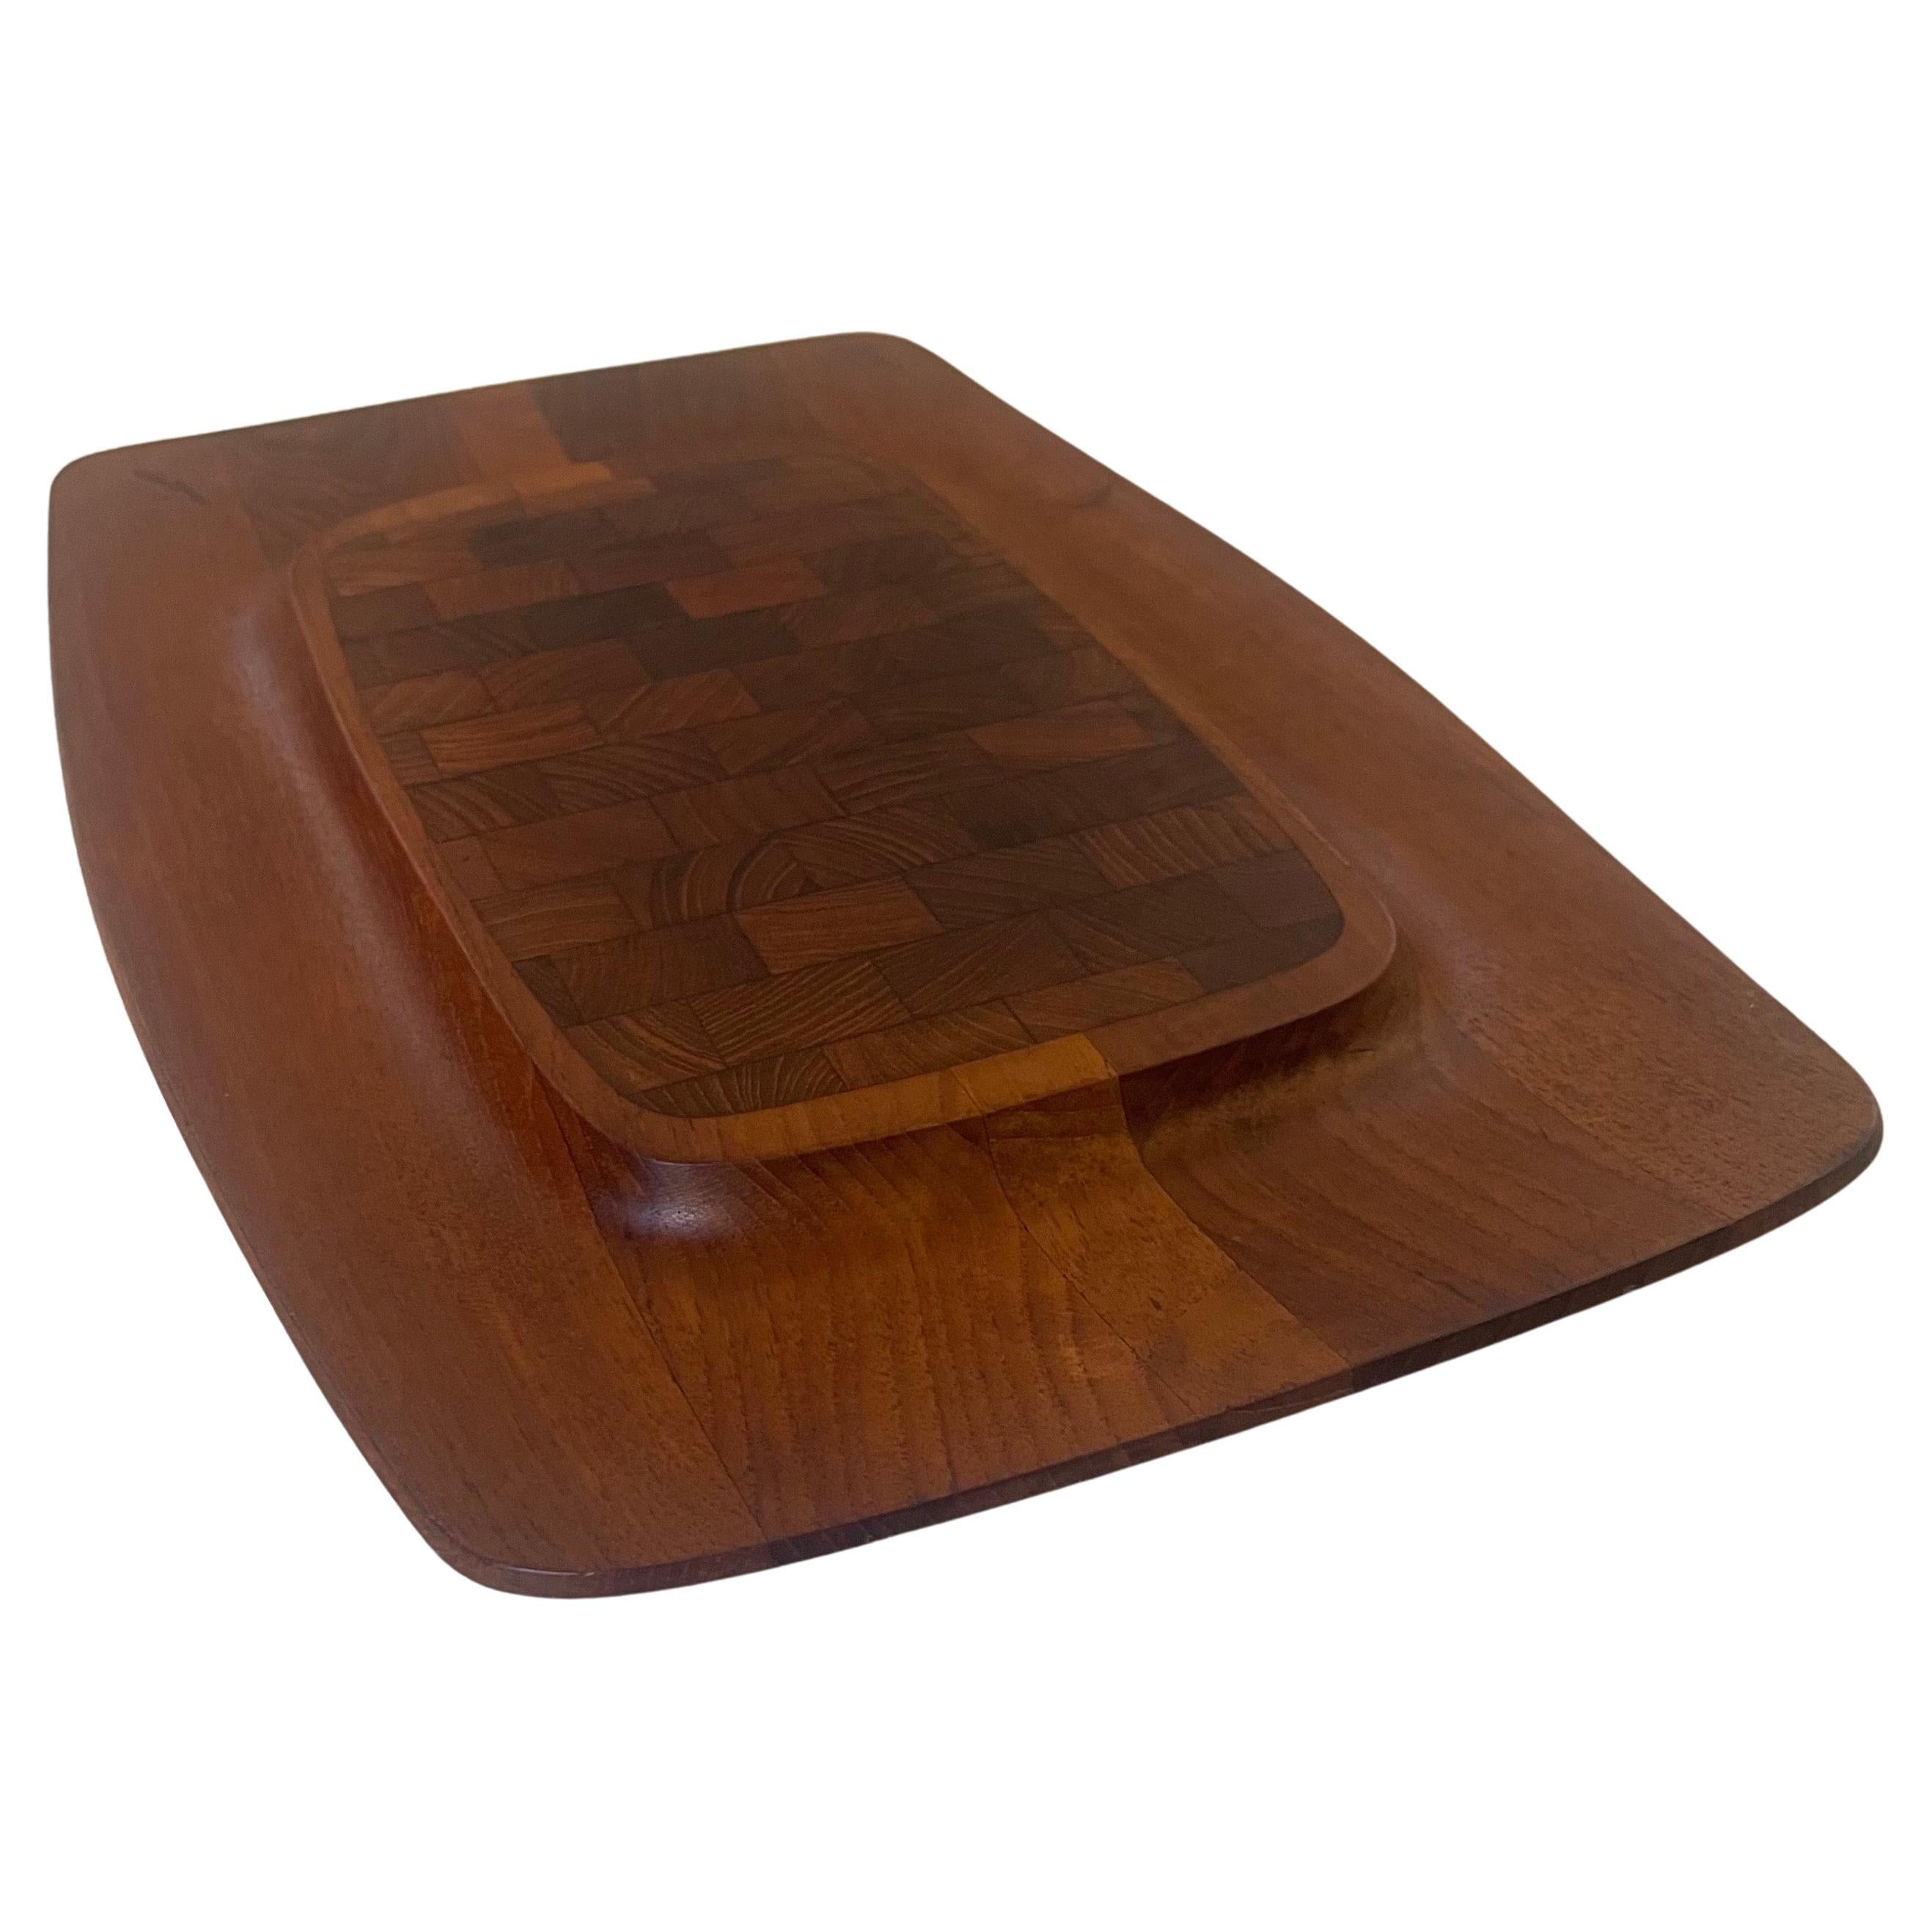 Danish modern teak butcher block cutting board / cheese tray by Jens Quistgaard for Dansk, circa 1960s. The piece is in good vintage condition and measures 19